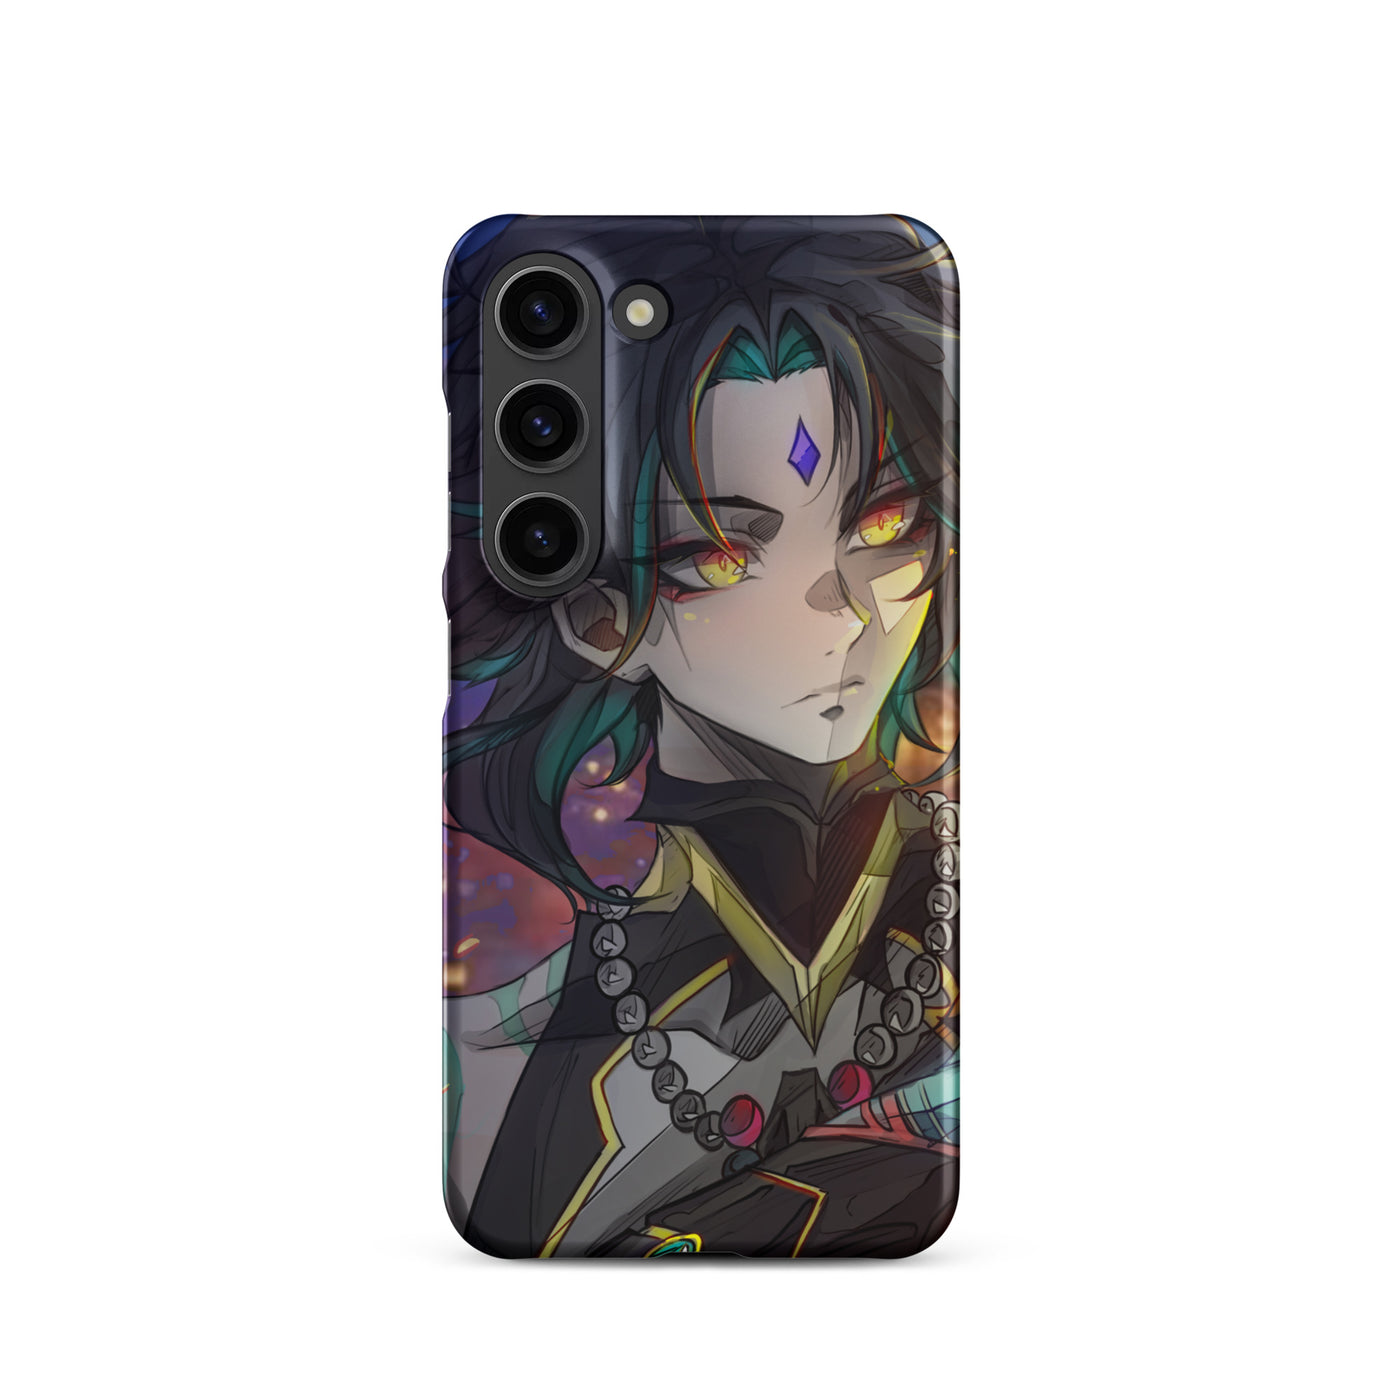 Xiao from Genshin Impact case for Samsung®